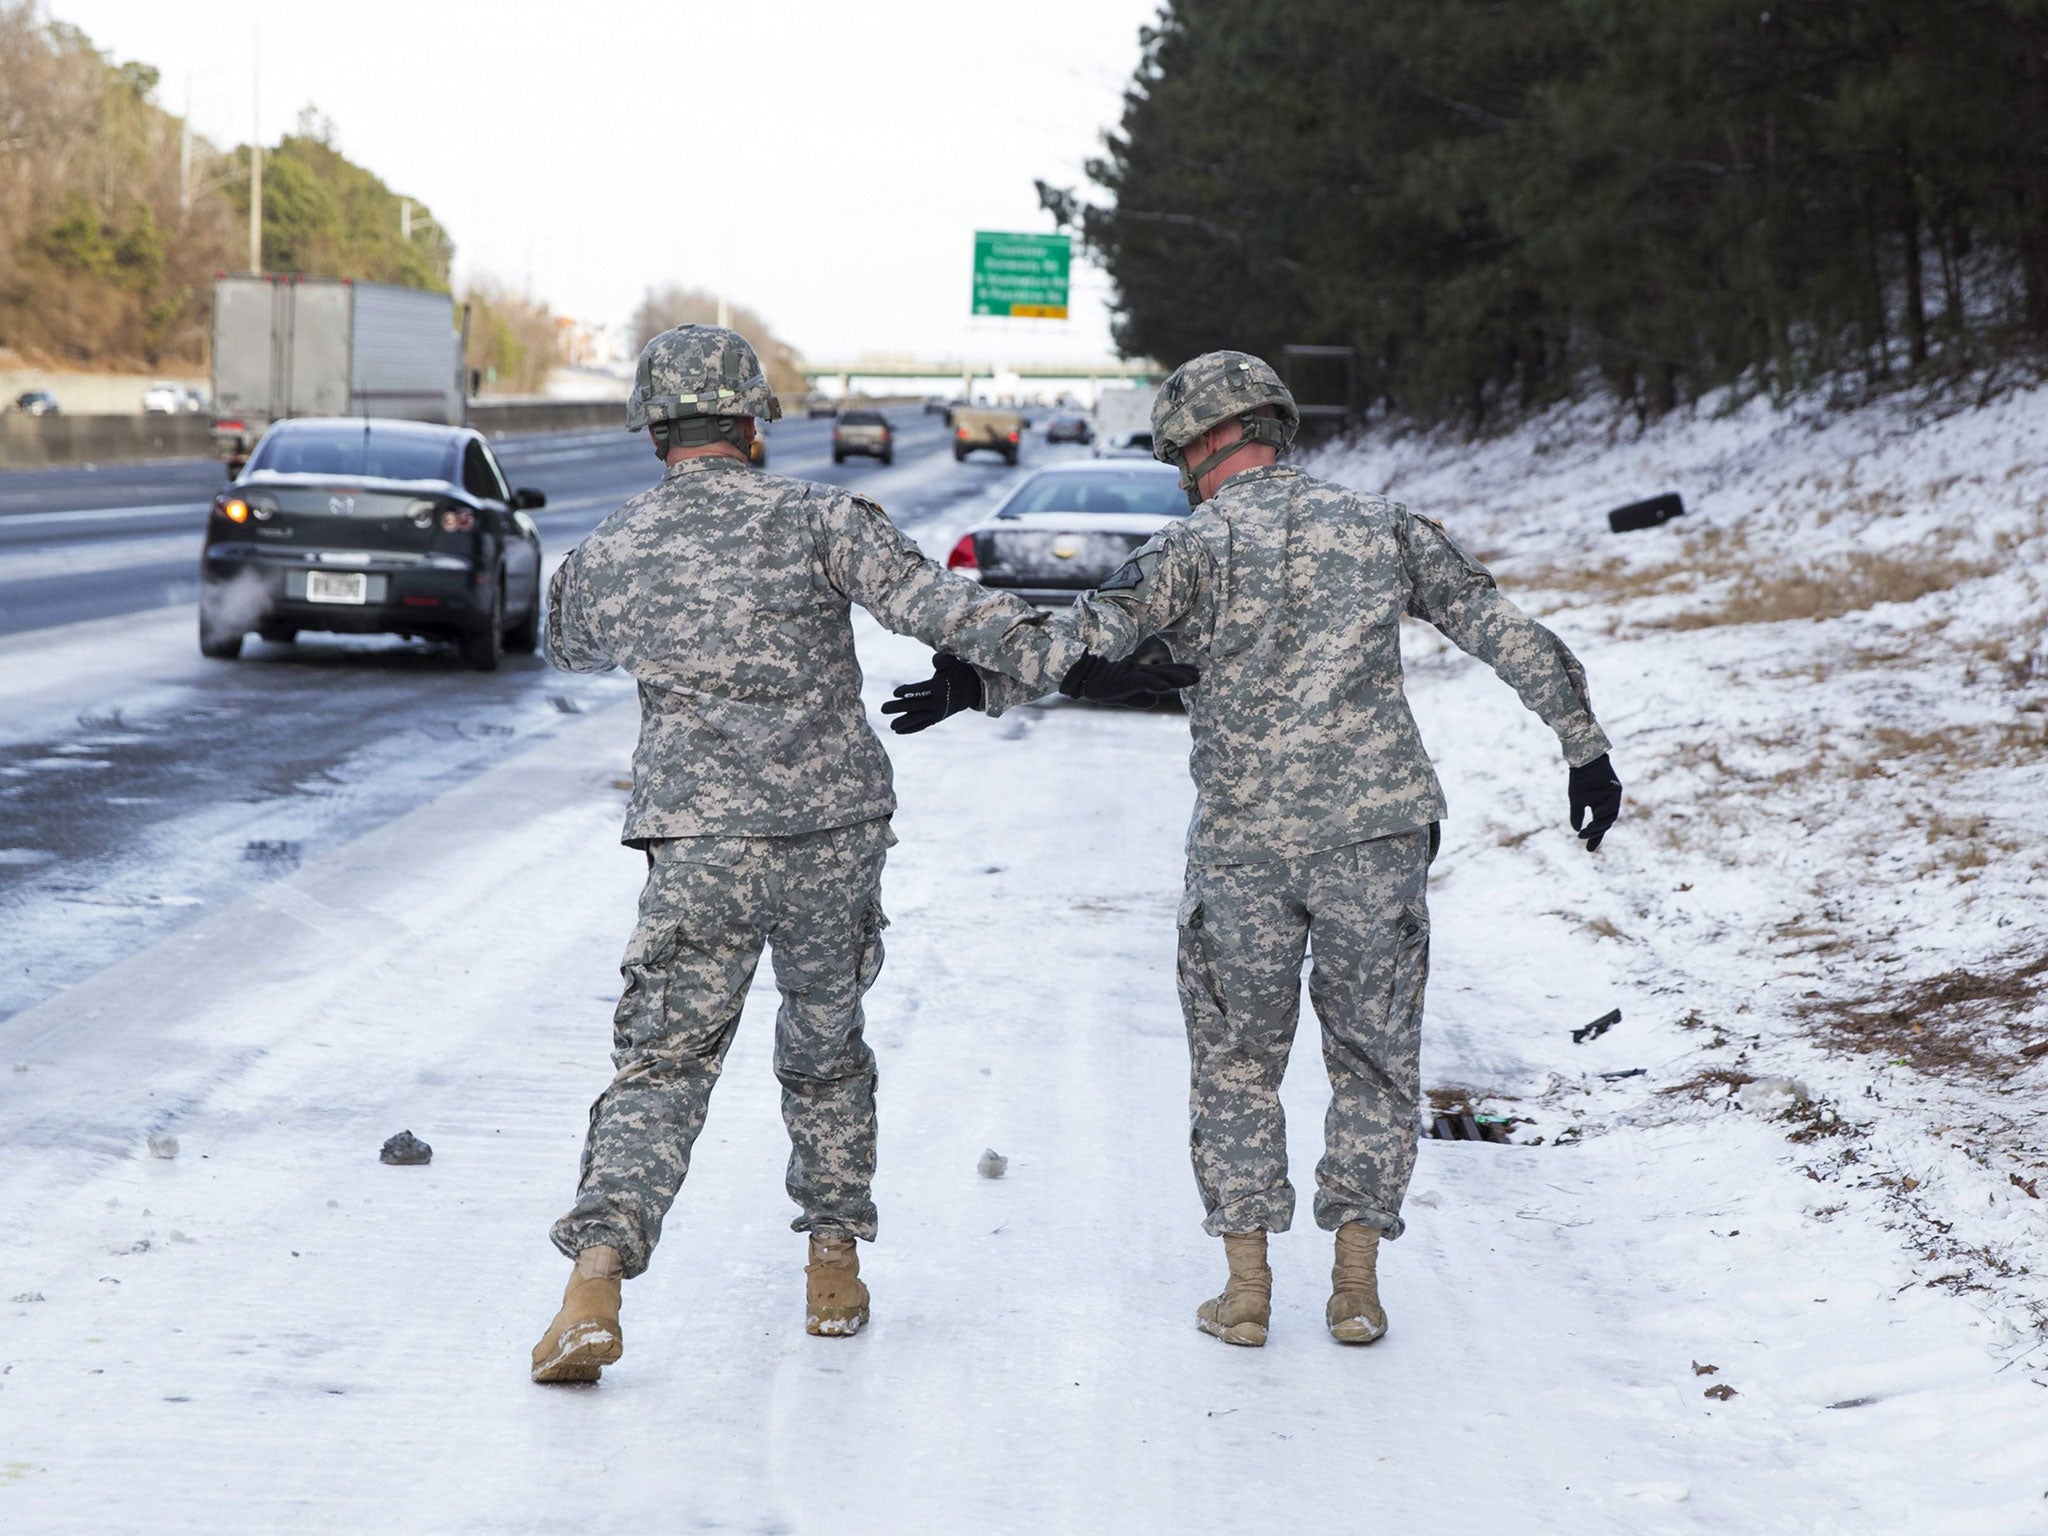 Georgia National Guard troops Command Sgt. Maj. Buddy Grisham (L) and Sgt. Chad Armstrong help each other from slipping on the ice as they assist people in getting their stranded cars out of the snow in Atlanta, Georgia January 29, 2014. A rare ice storm